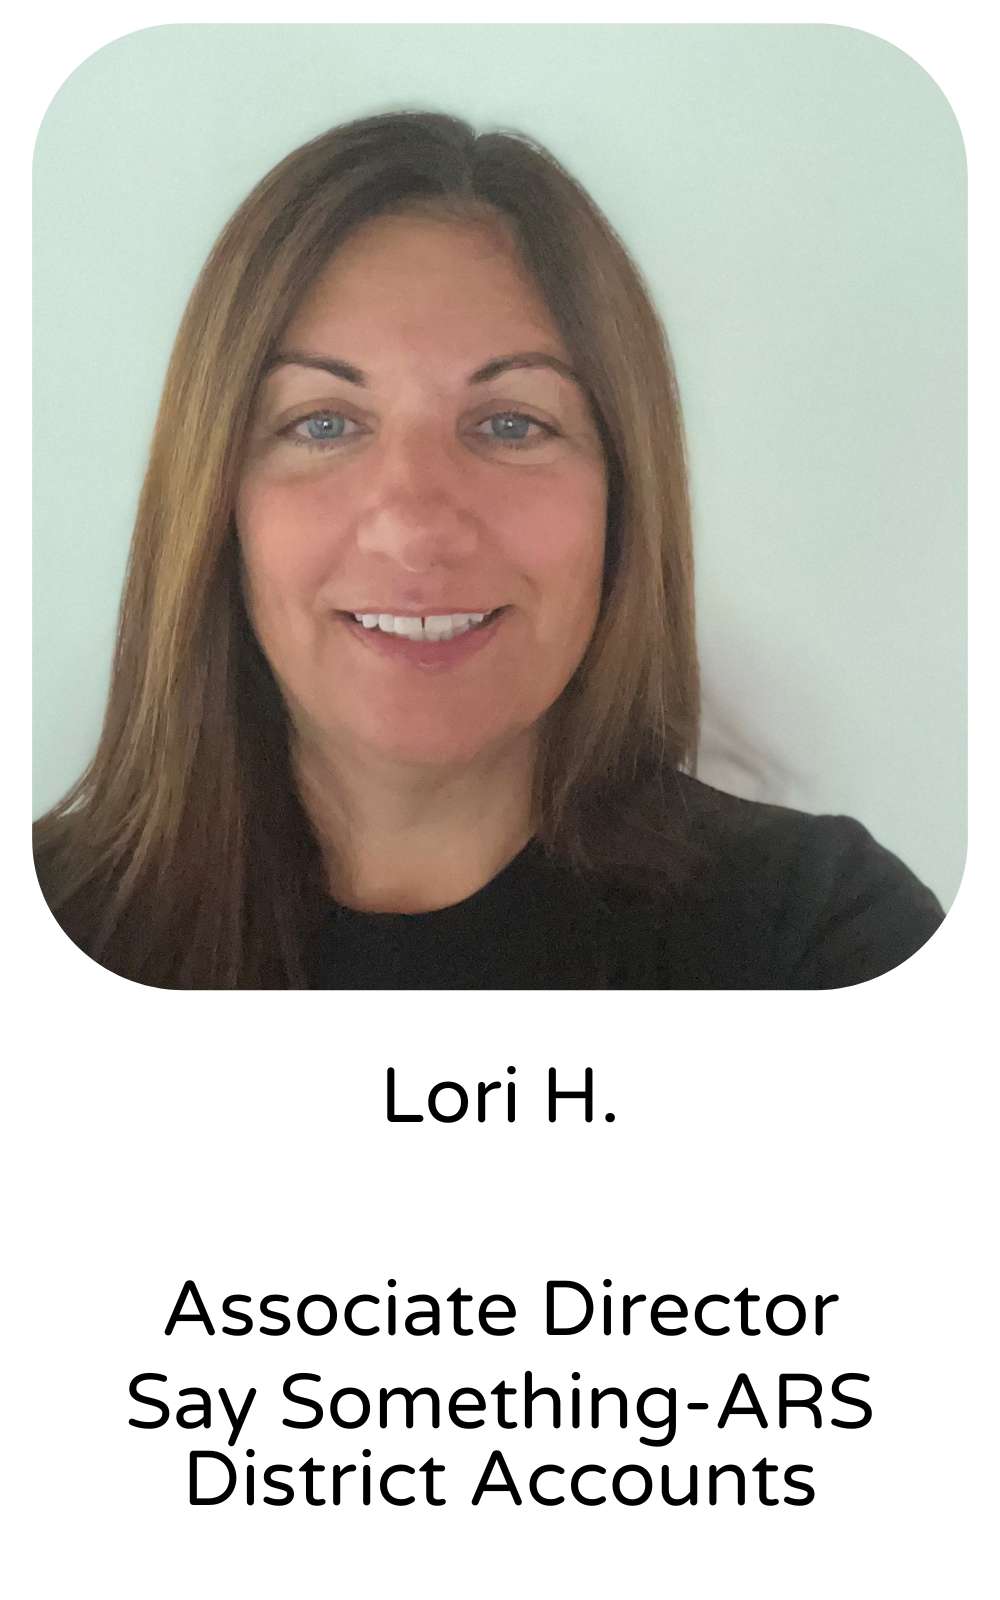 Lori H., Associate Director, Say Something-ARS District Accounts